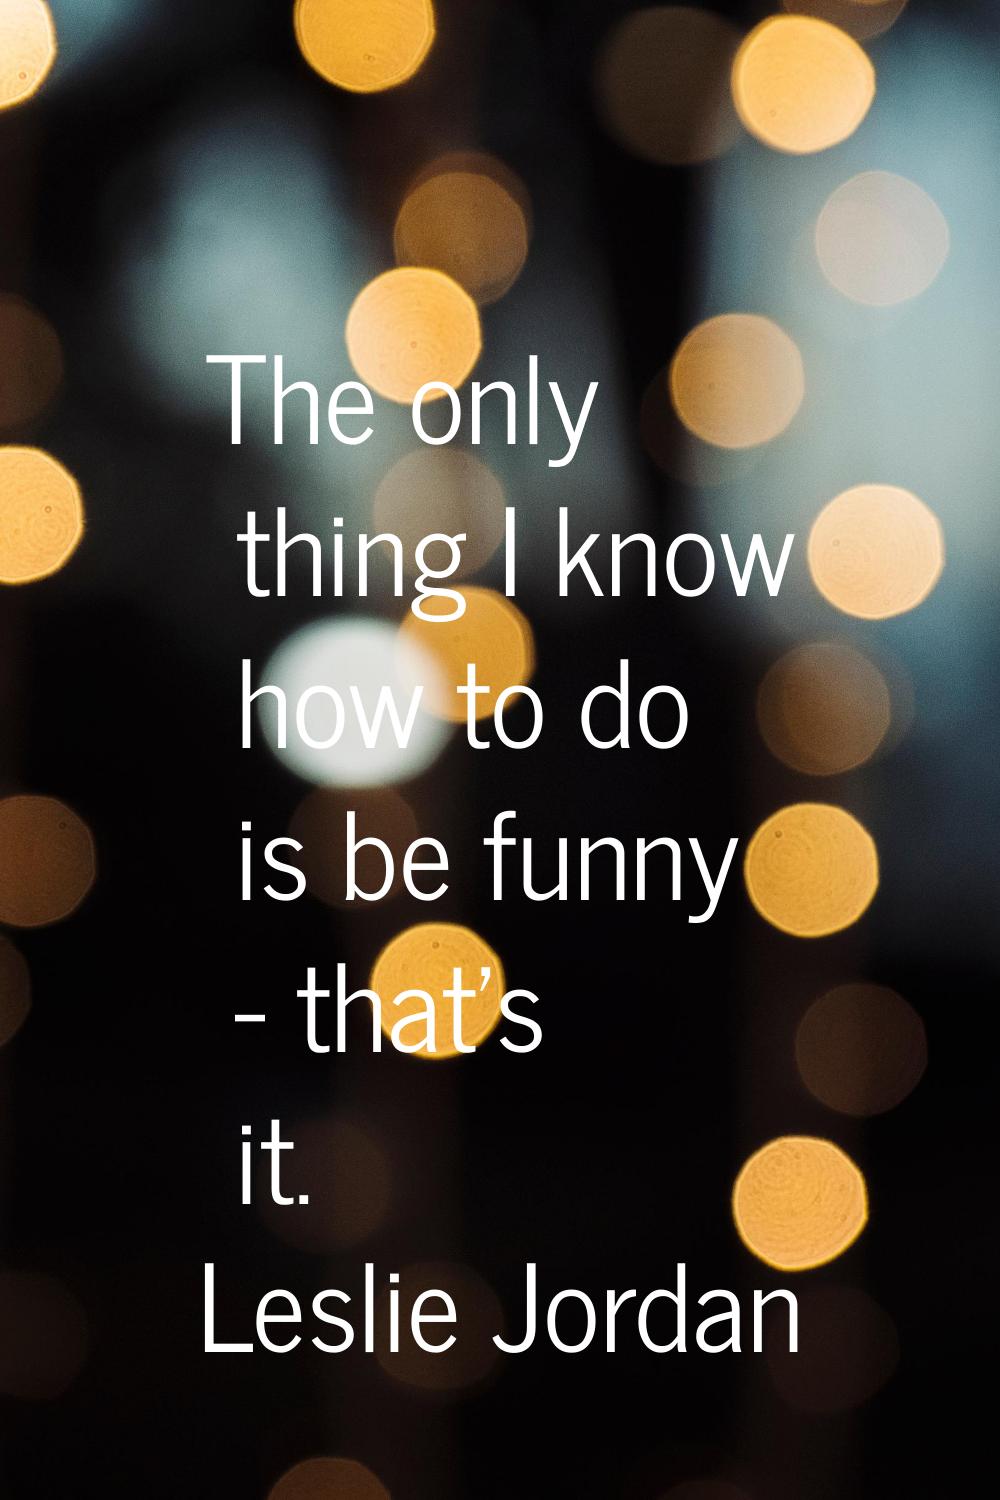 The only thing I know how to do is be funny - that's it.